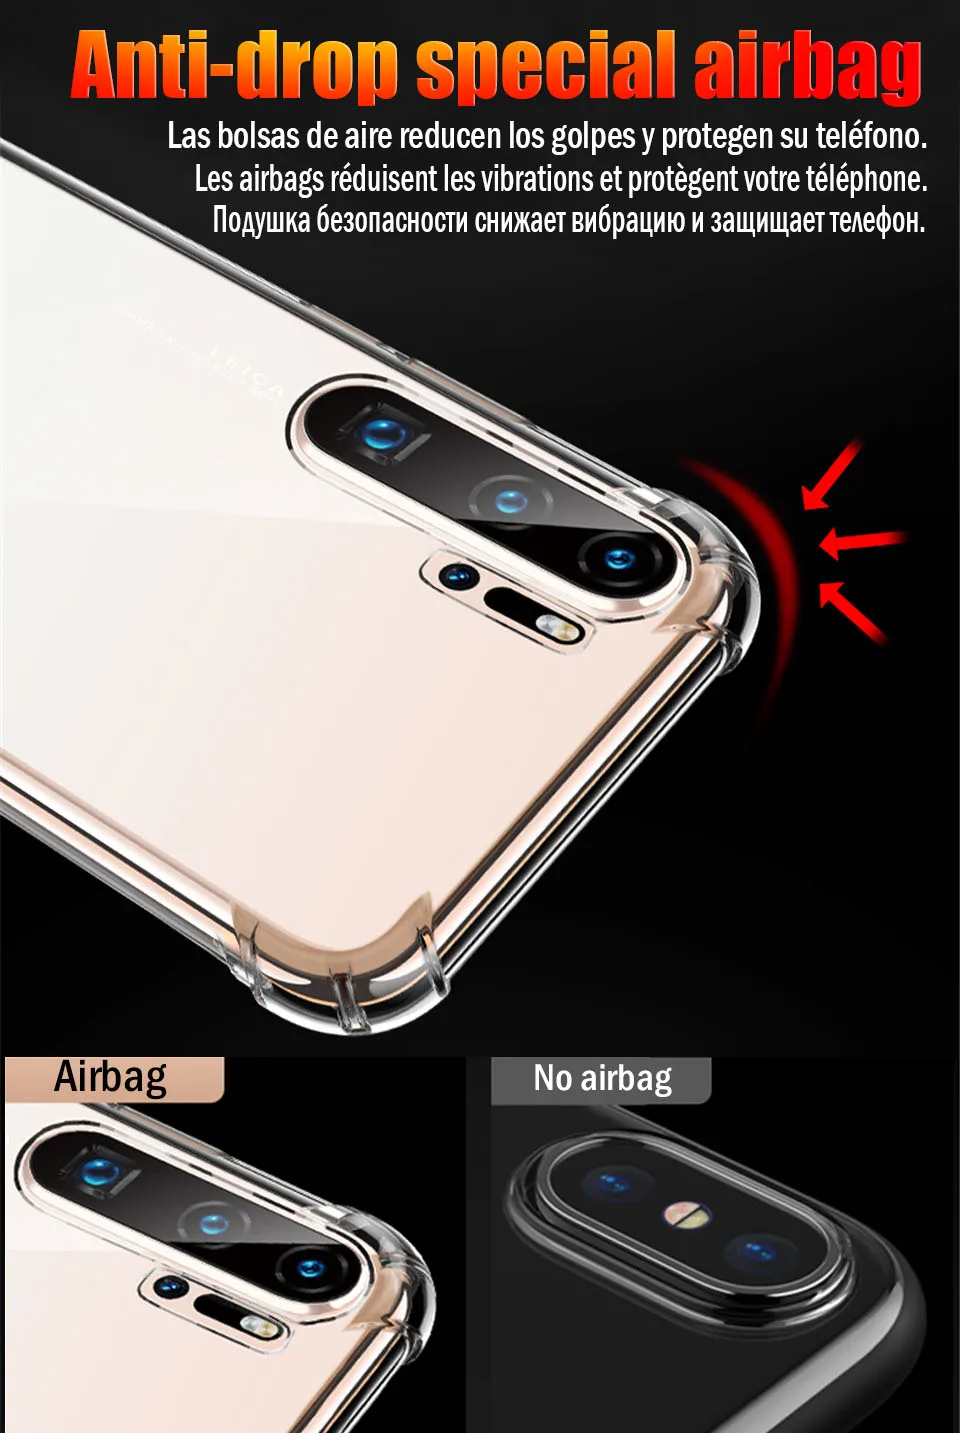 Shockproof Case For Huawei P20 P30 P10 Lite Mate 20 10 30 Pro P Smart Case For Honor 8x 9 10 Lite 20 Pro Nova 3 3i Cover